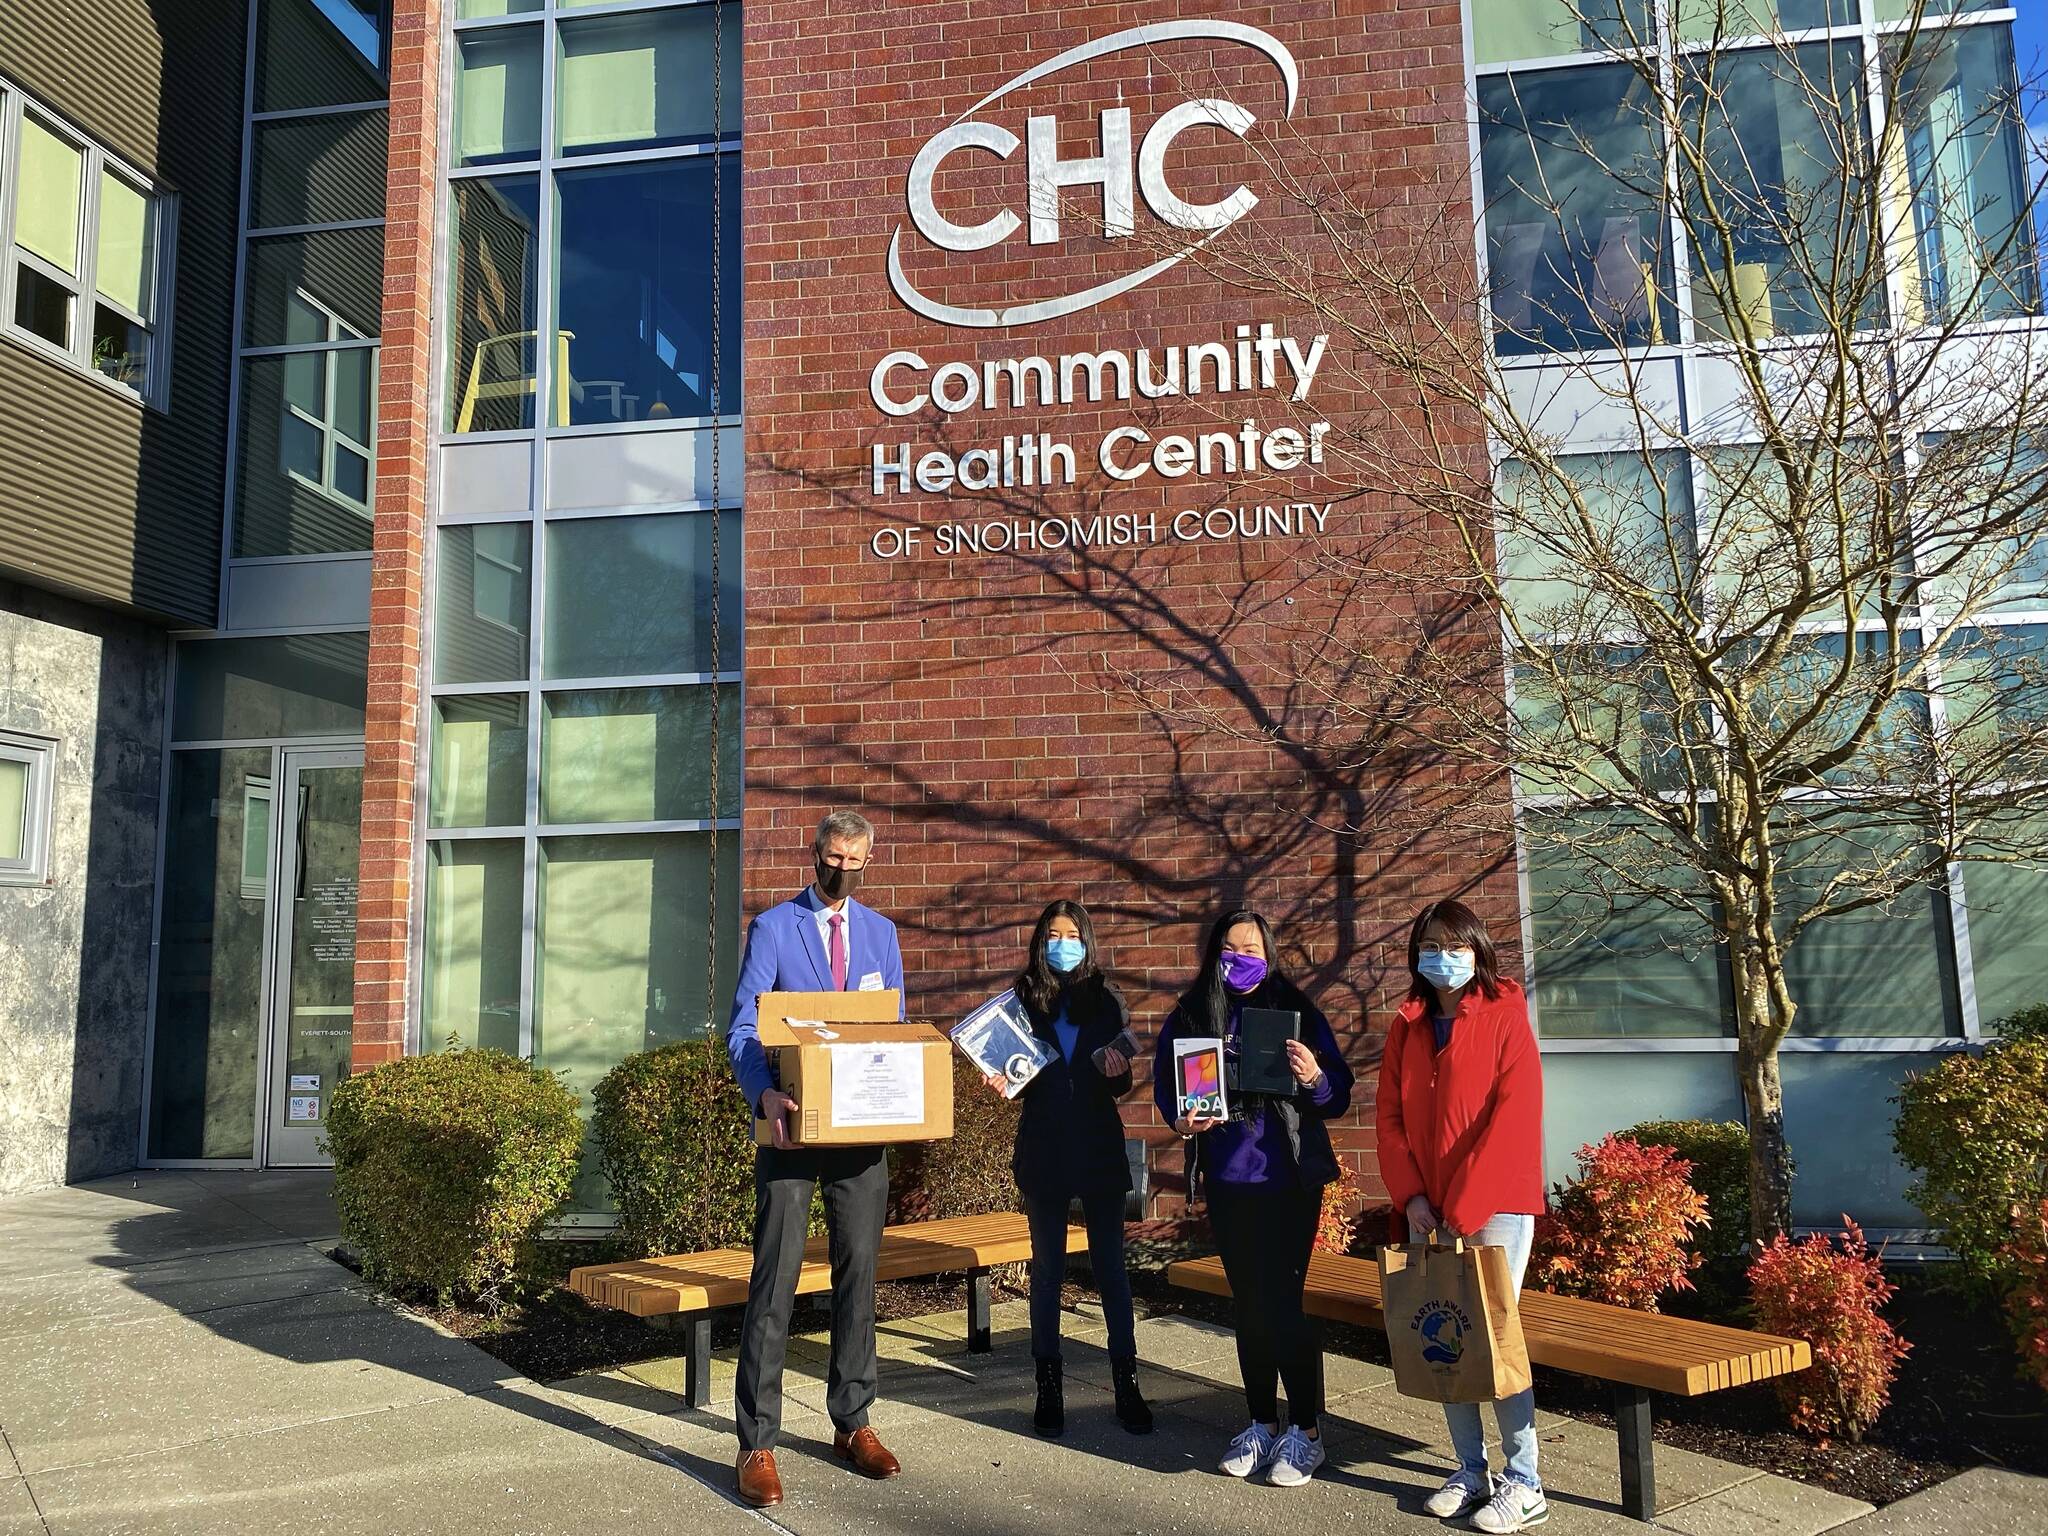 Cui, second from left, is part of the device drop-off team at the Community Health Center of Snohomish County in Everett. Courtesy photo